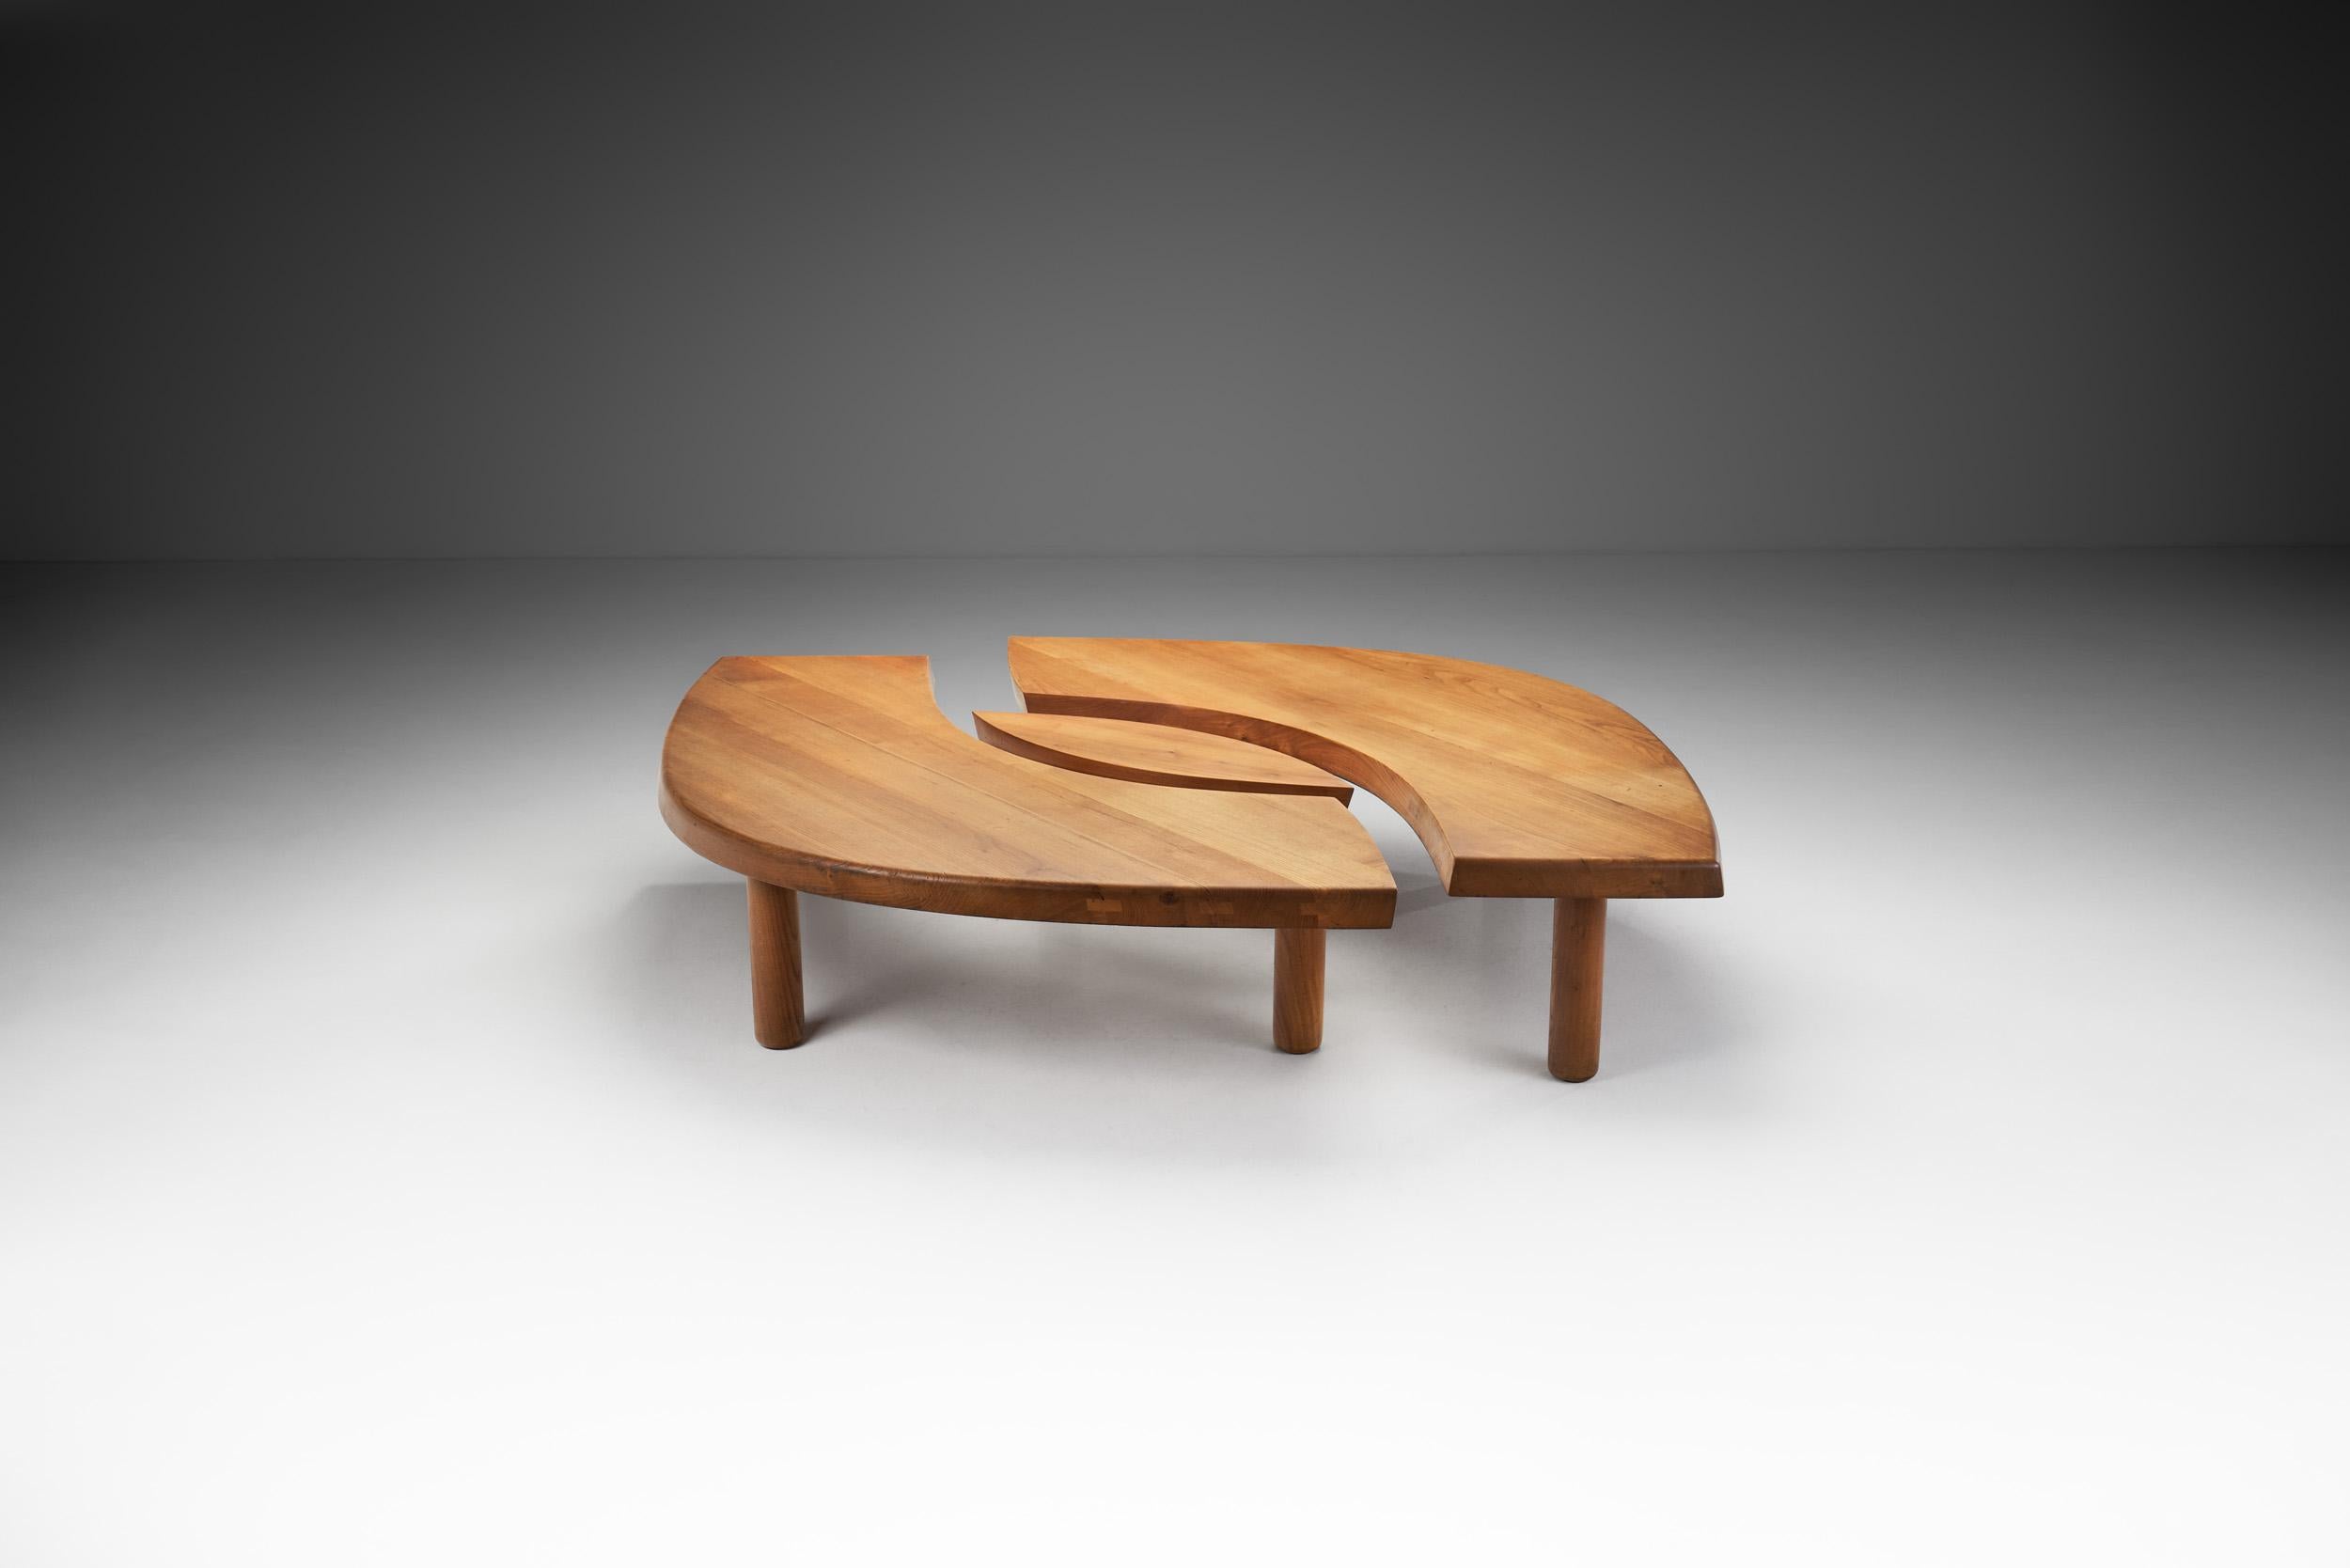 This peculiar table model is also referred to as the “Eye”. While the name needs no further explanation, the ingenious design certainly does. Pierre Chapo always paired his creative and elegant designs with impeccable craftsmanship that gained him